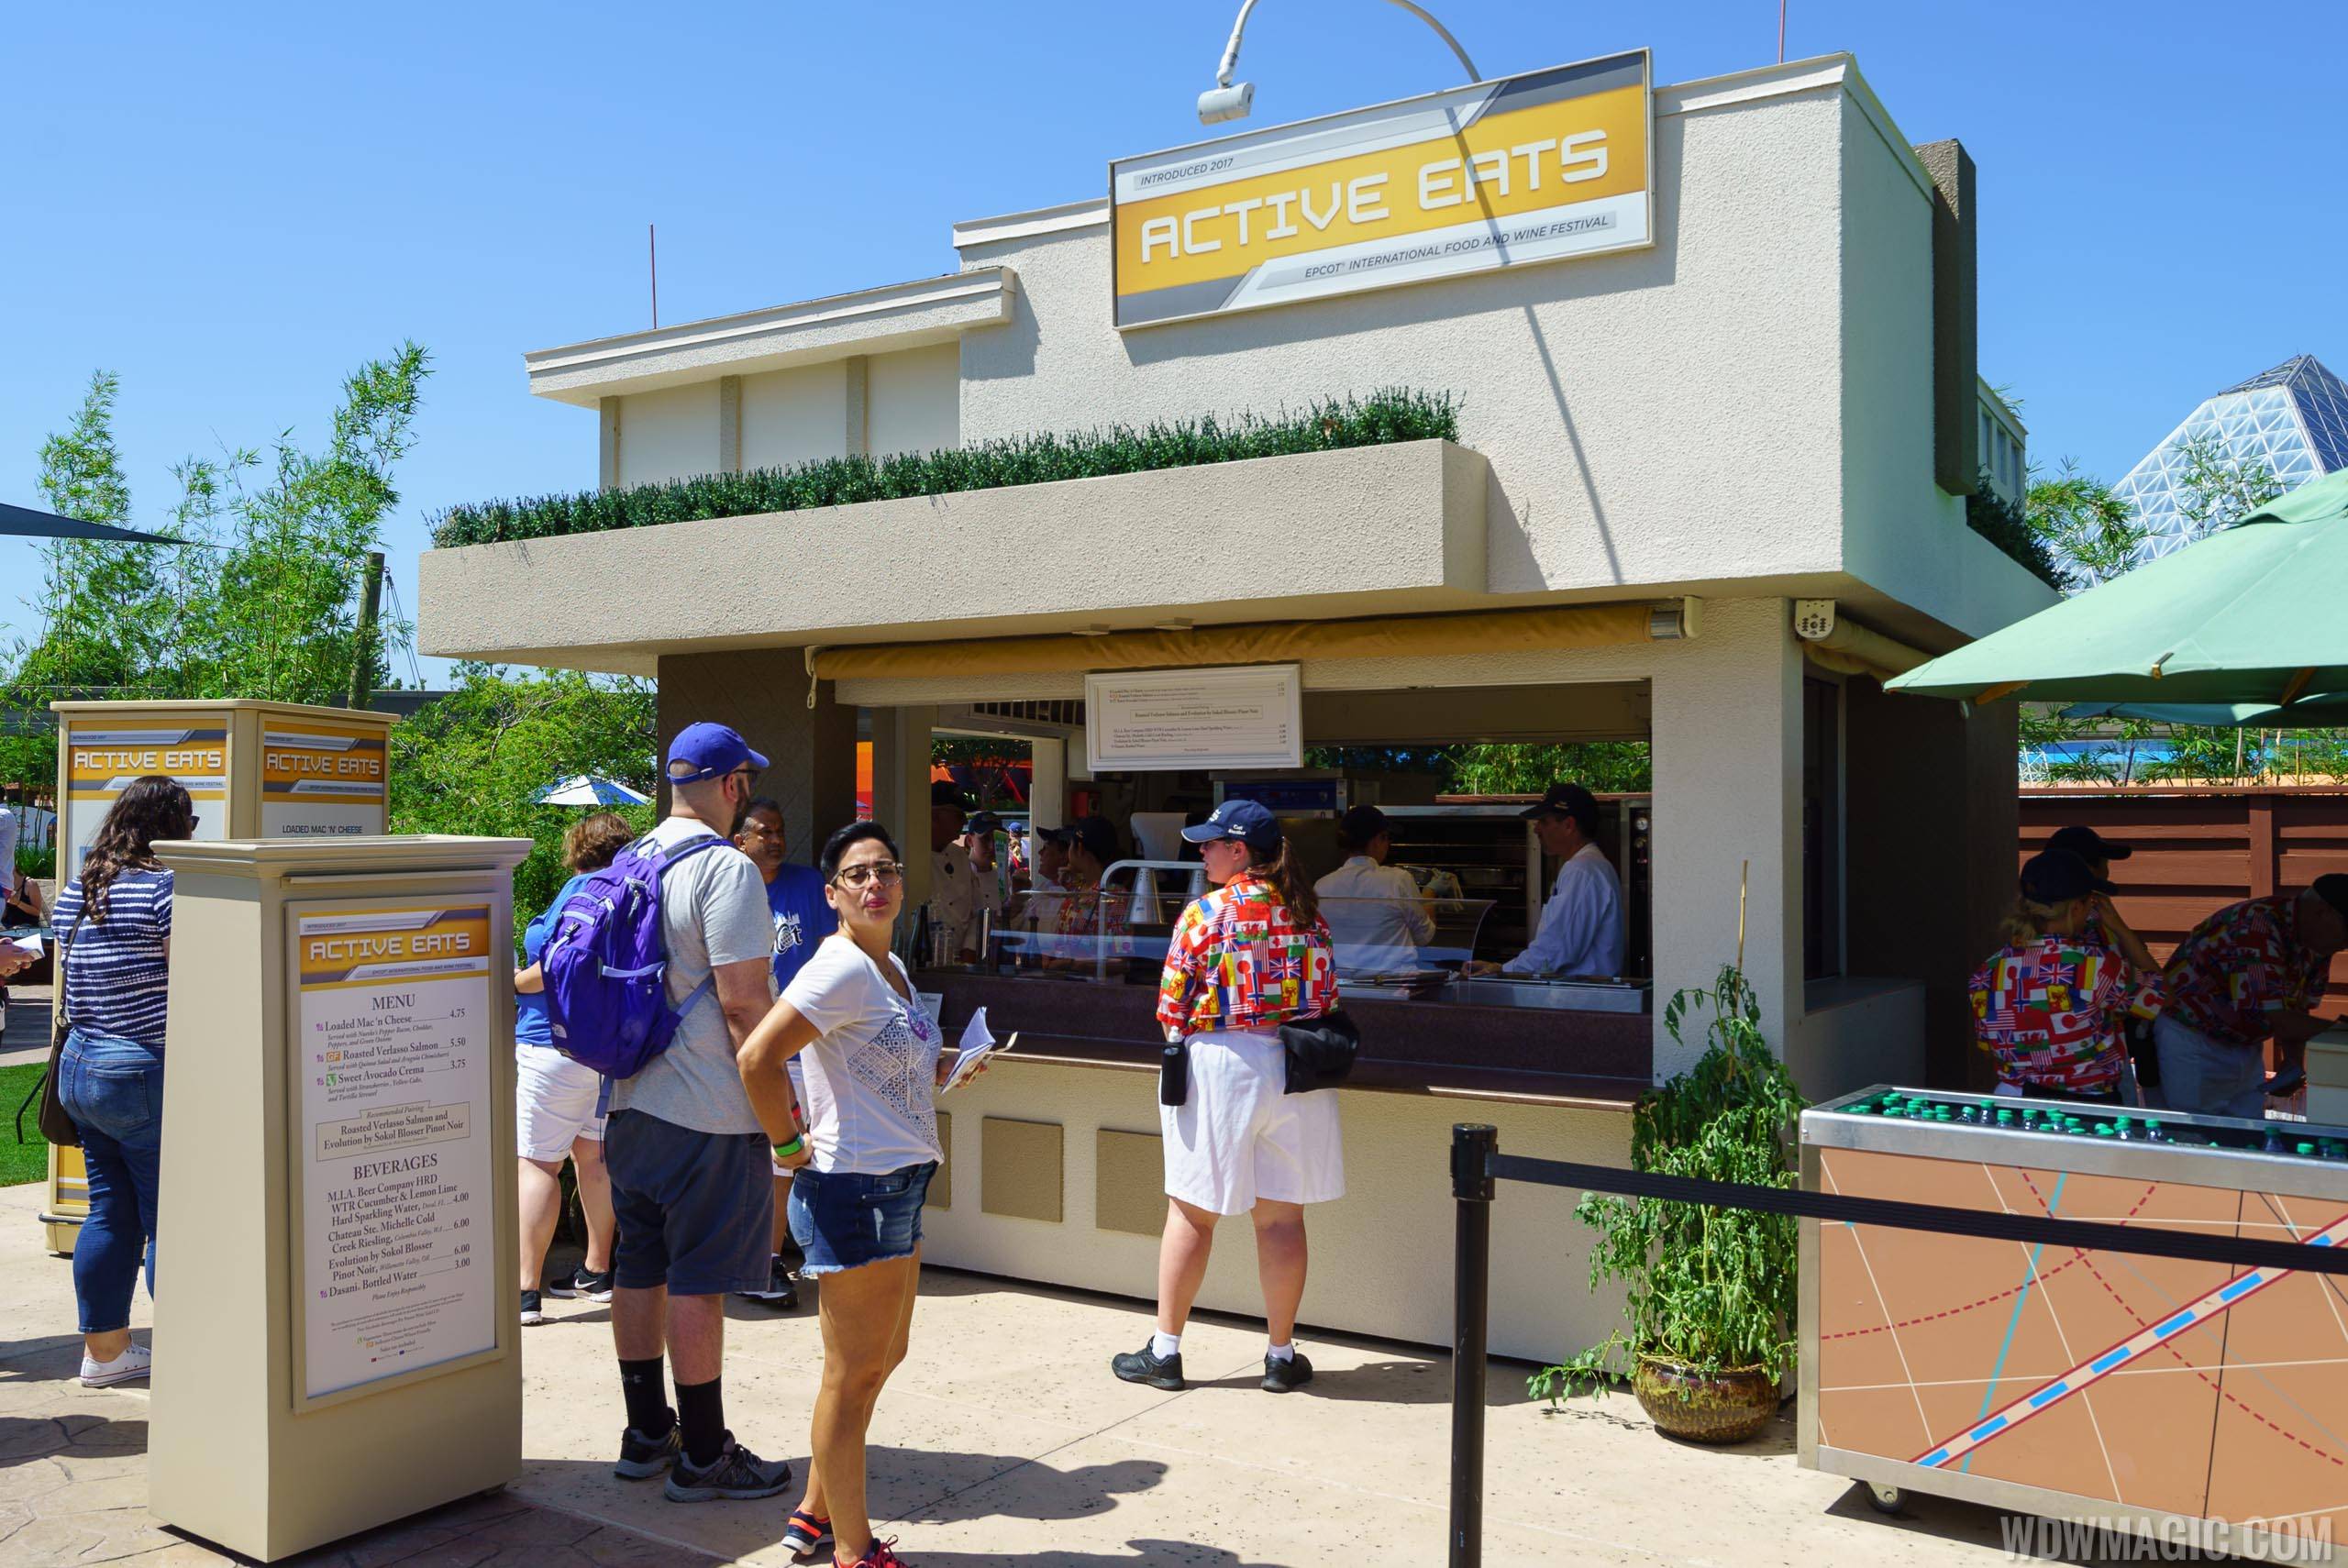 2017 Epcot Food and Wine Festival - Active Eats marketplace kiosk